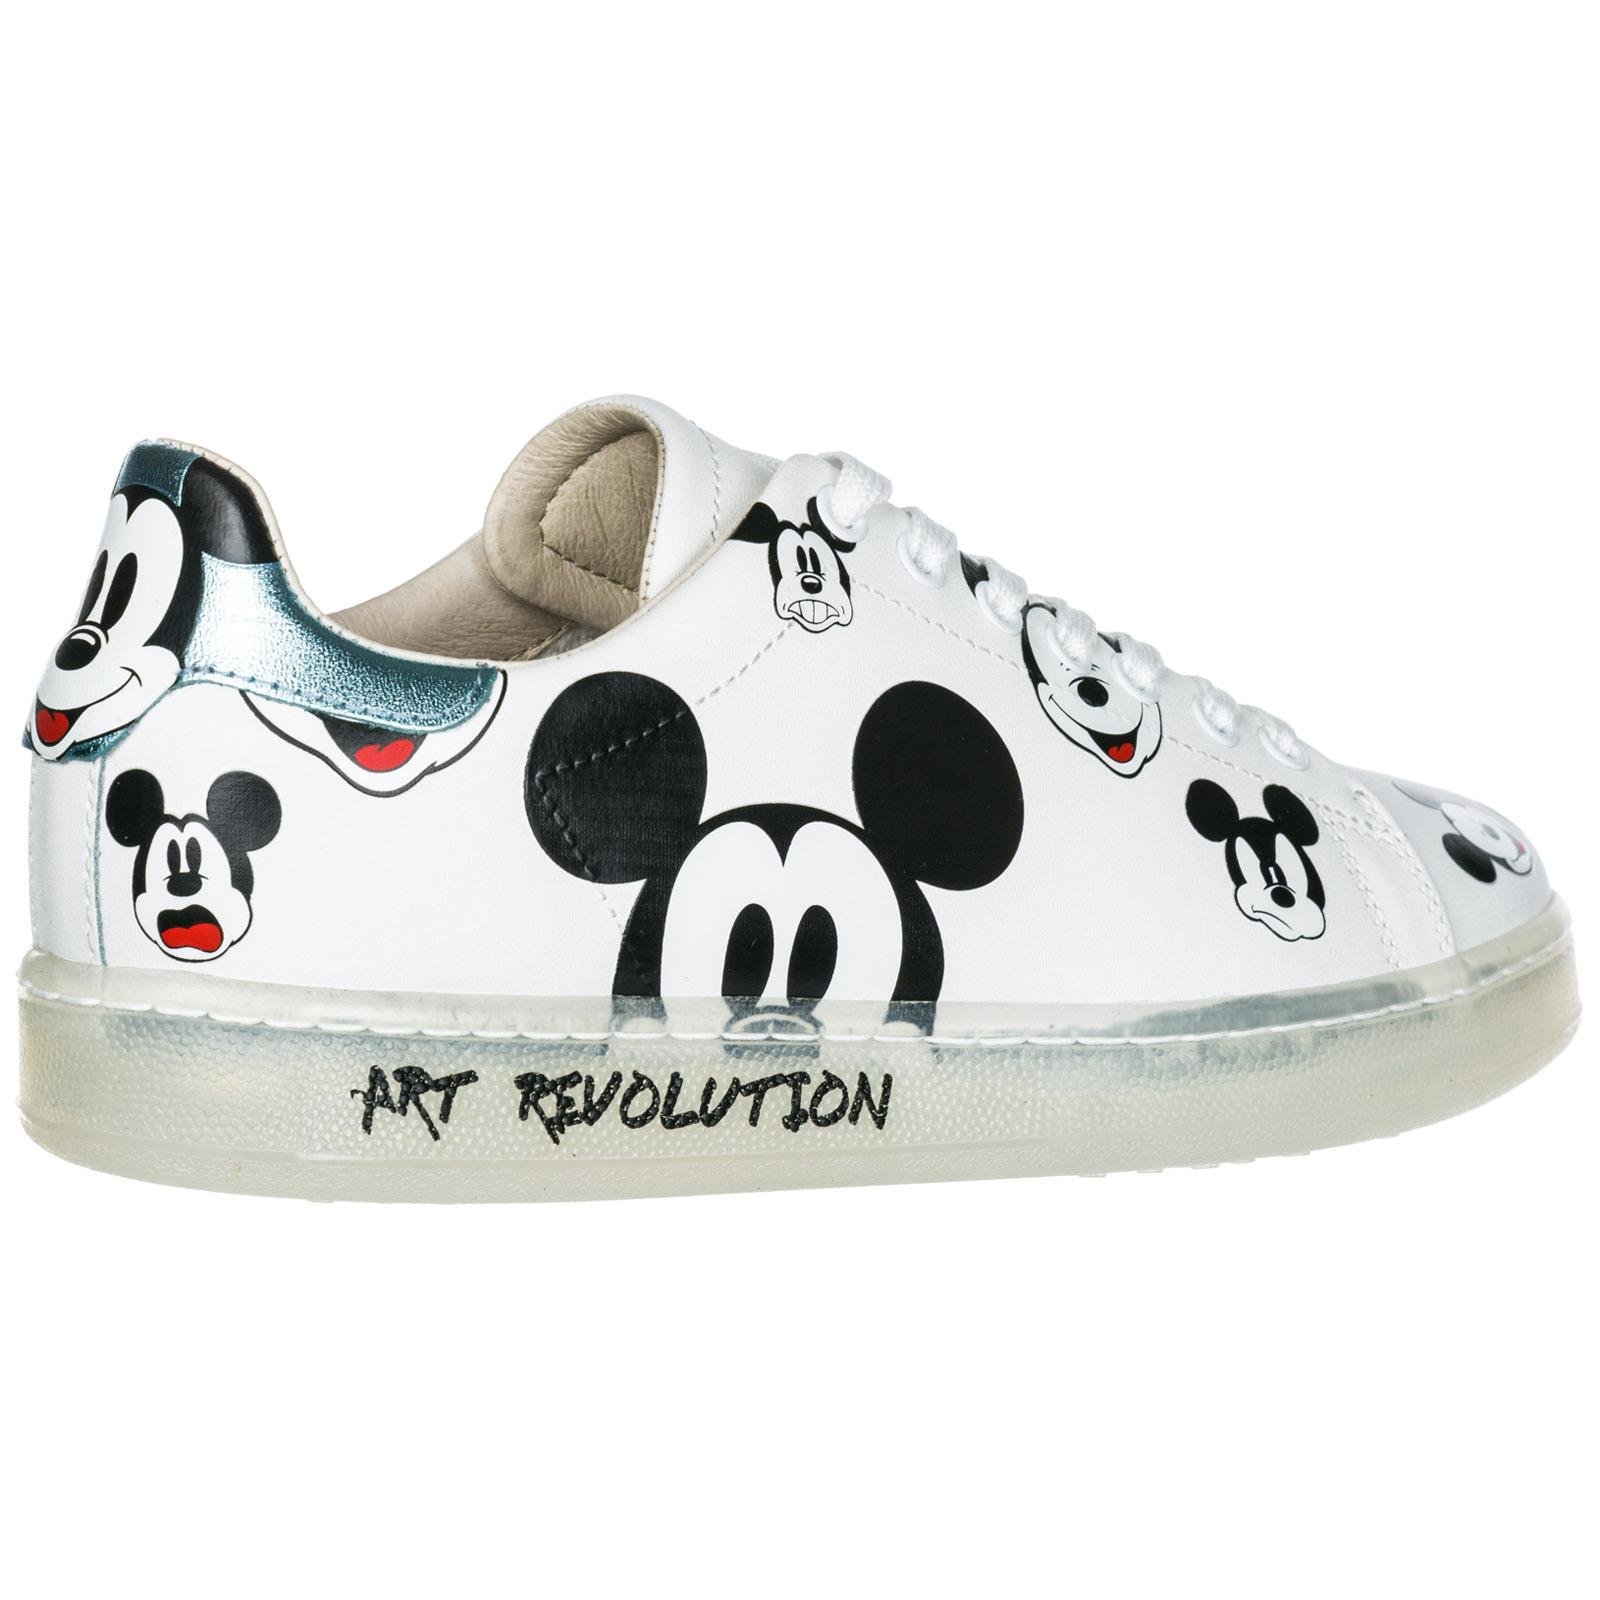 mickey mouse trainers ladies